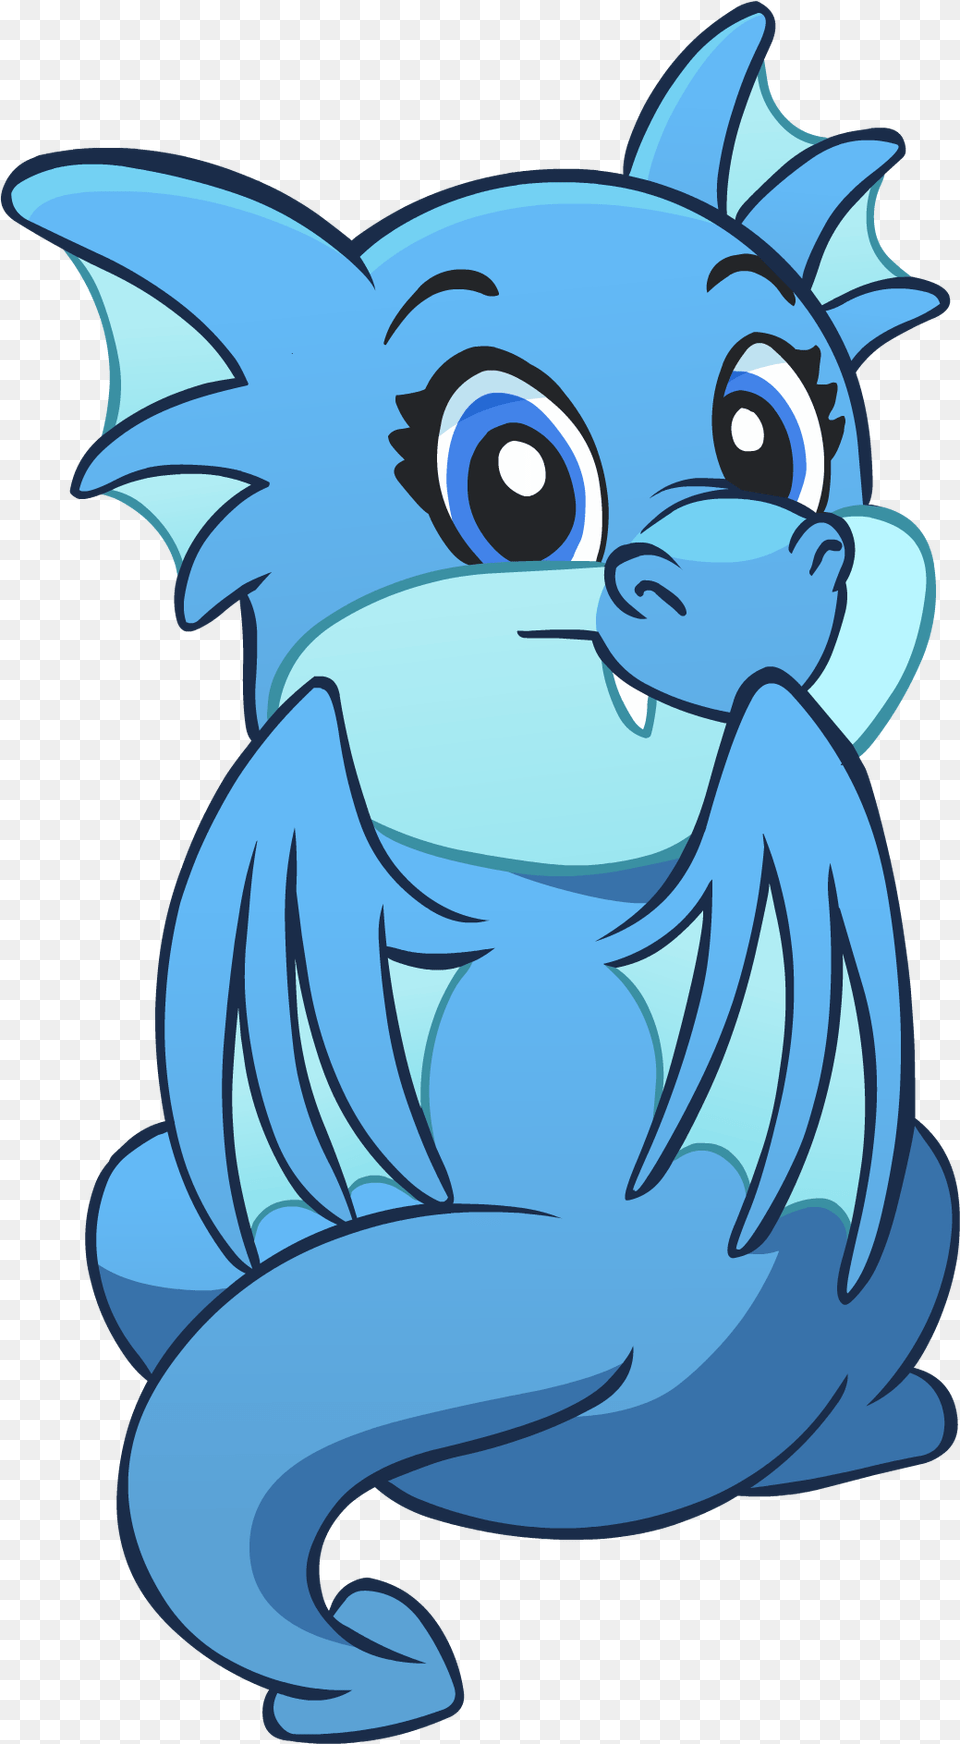 Our Mascot Isnu0027t She Cute Creatures Blue Dragon Cartoon, Animal, Bird, Jay Free Png Download